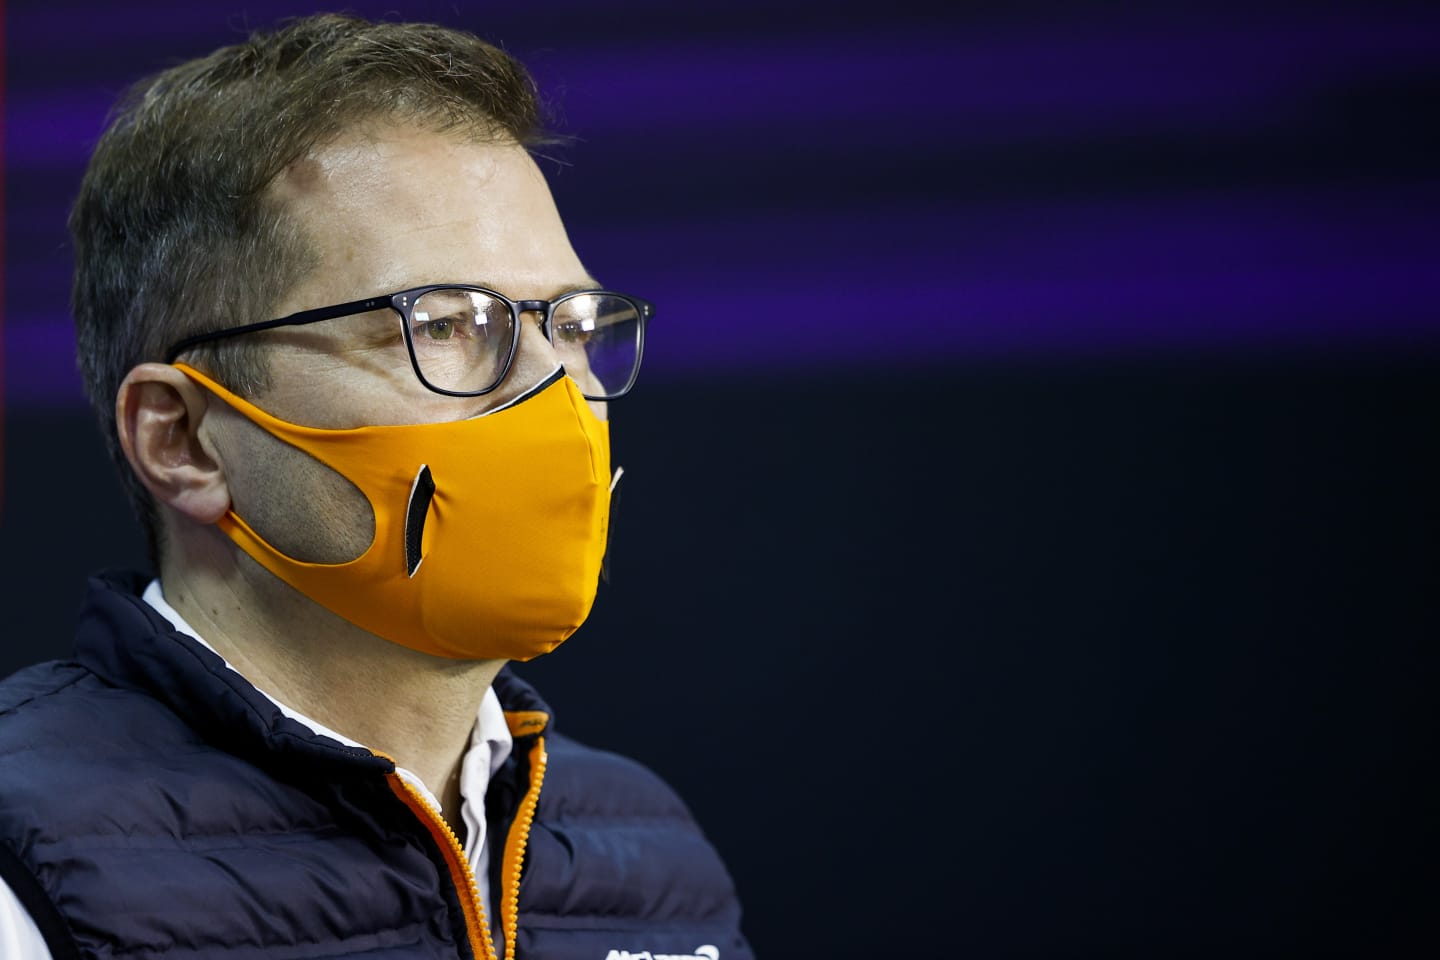 BAHRAIN, BAHRAIN - NOVEMBER 27: McLaren Team Principal Andreas Seidl talks in the Team Principals Press Conference during practice ahead of the F1 Grand Prix of Bahrain at Bahrain International Circuit on November 27, 2020 in Bahrain, Bahrain. (Photo by Andy Hone - Pool/Getty Images)